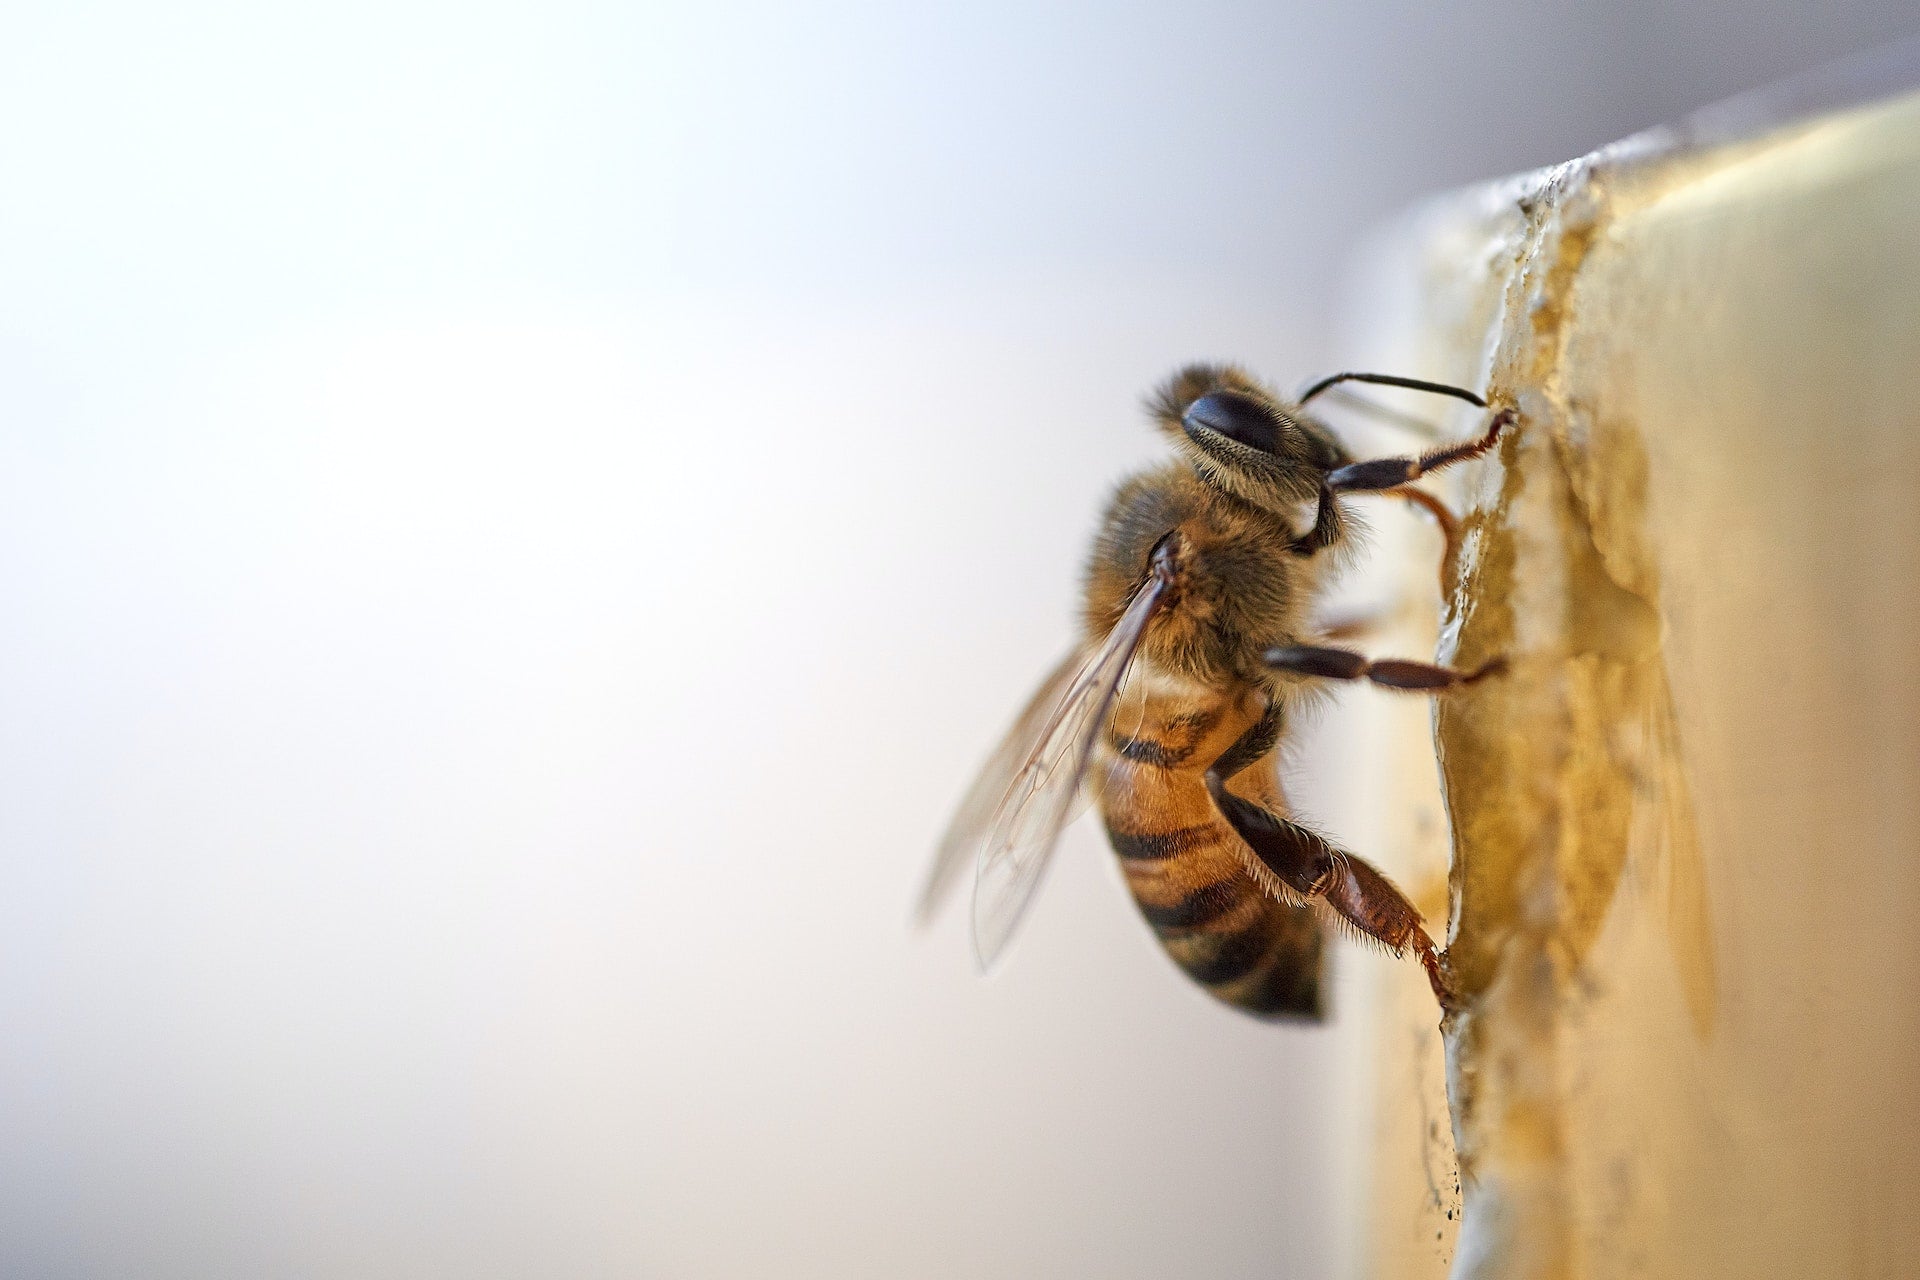 ShortHive Bee Facts - Image of bee on honey